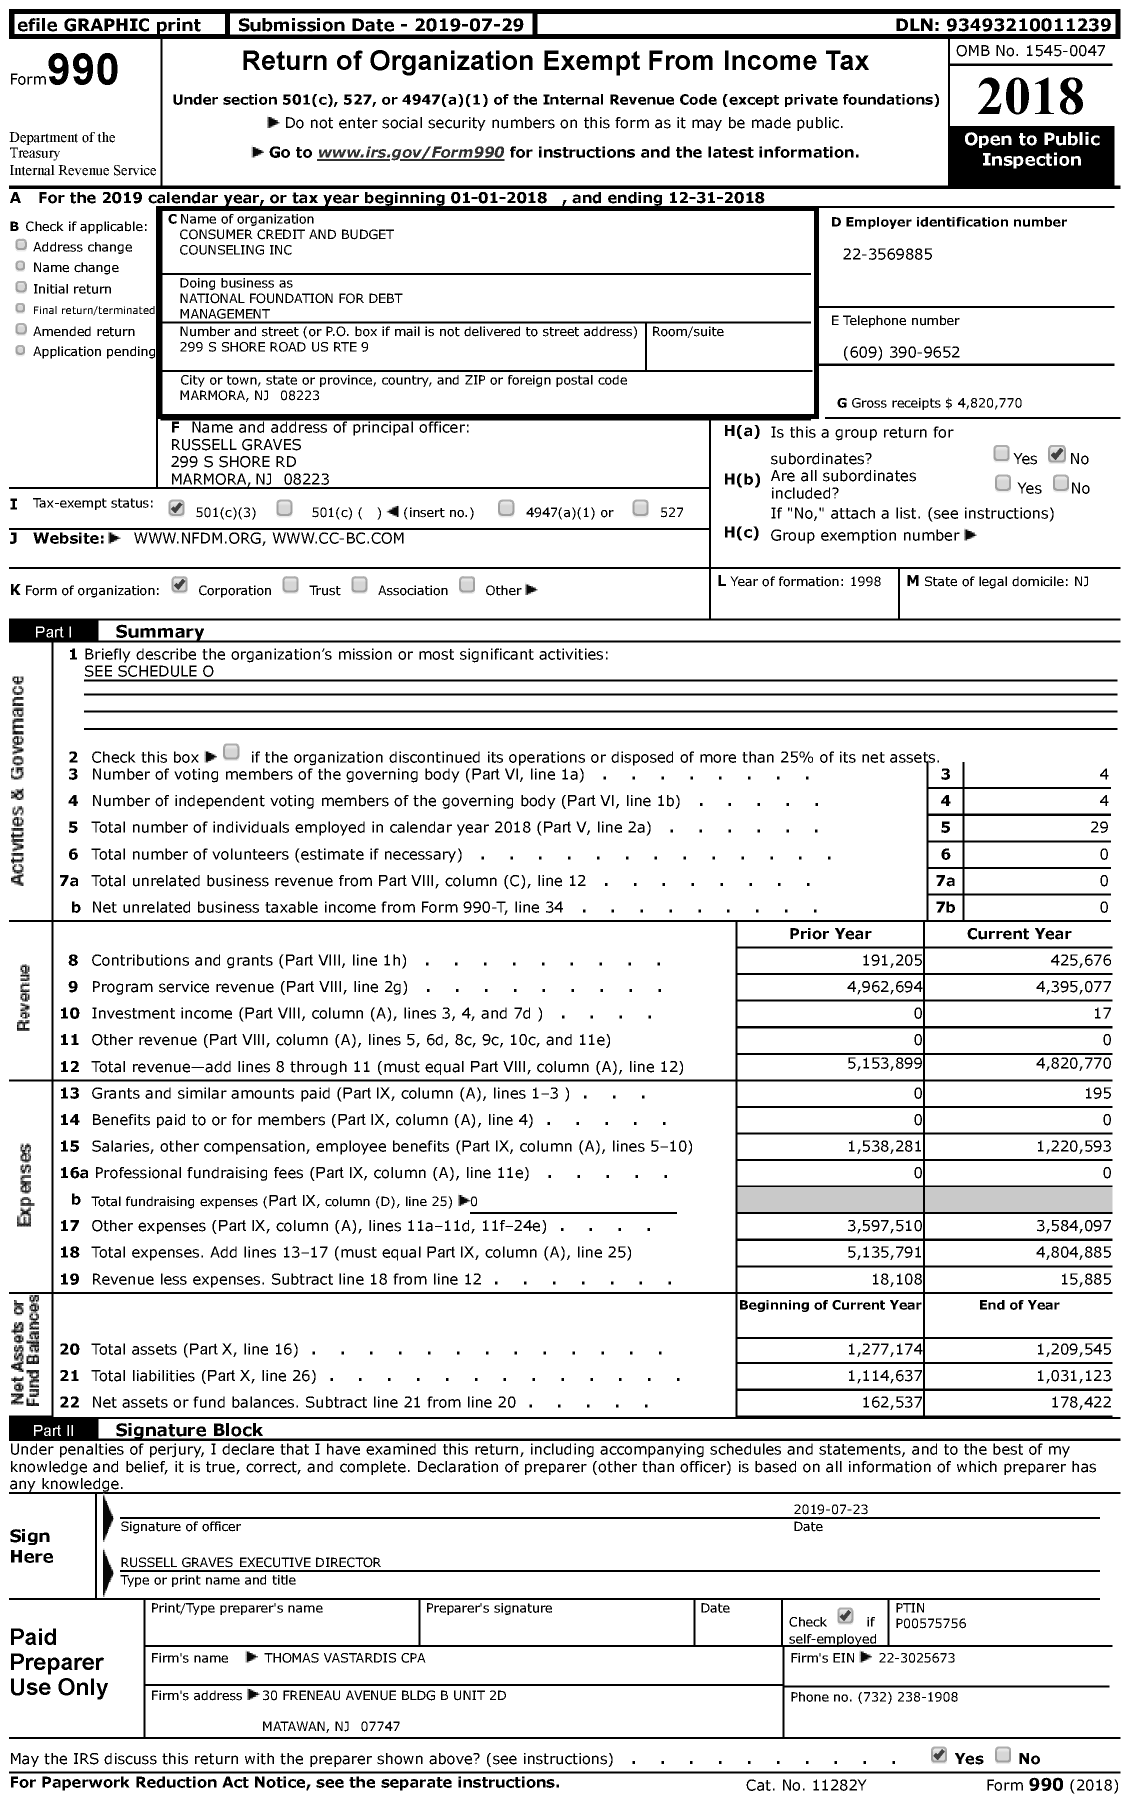 Image of first page of 2018 Form 990 for National Foundation for Debt Management